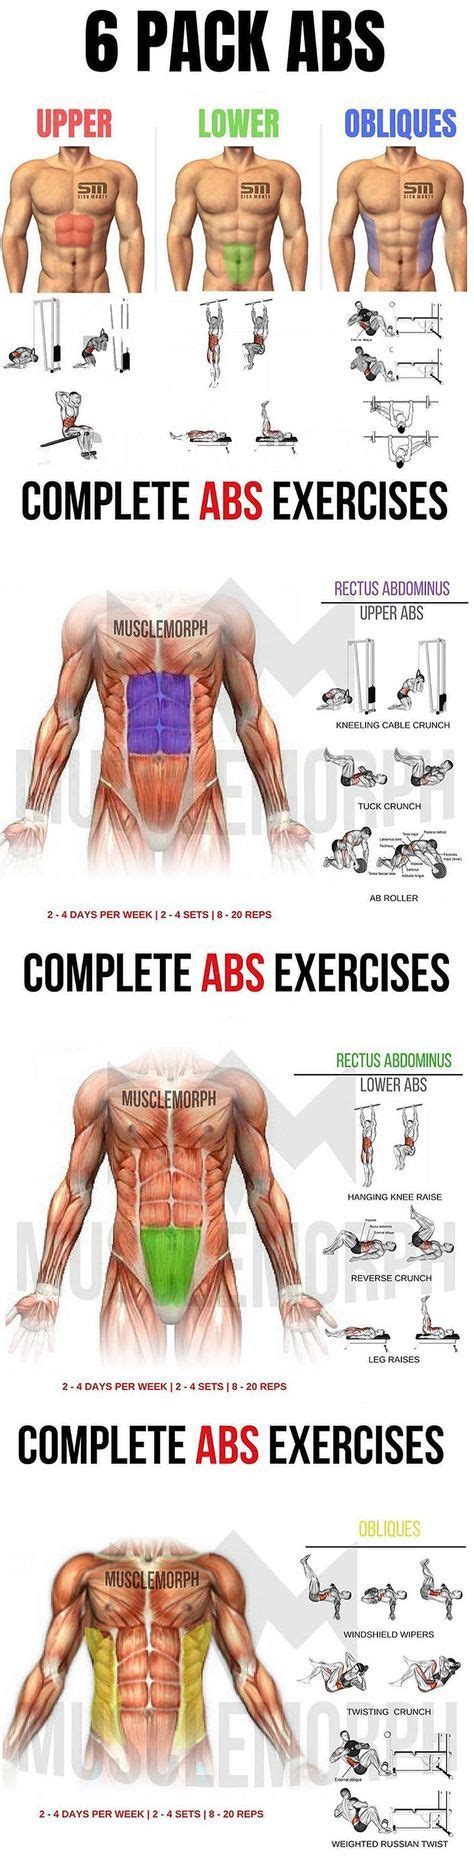 6 Pack Abs Abs Workout Abs Workout Routines Workout